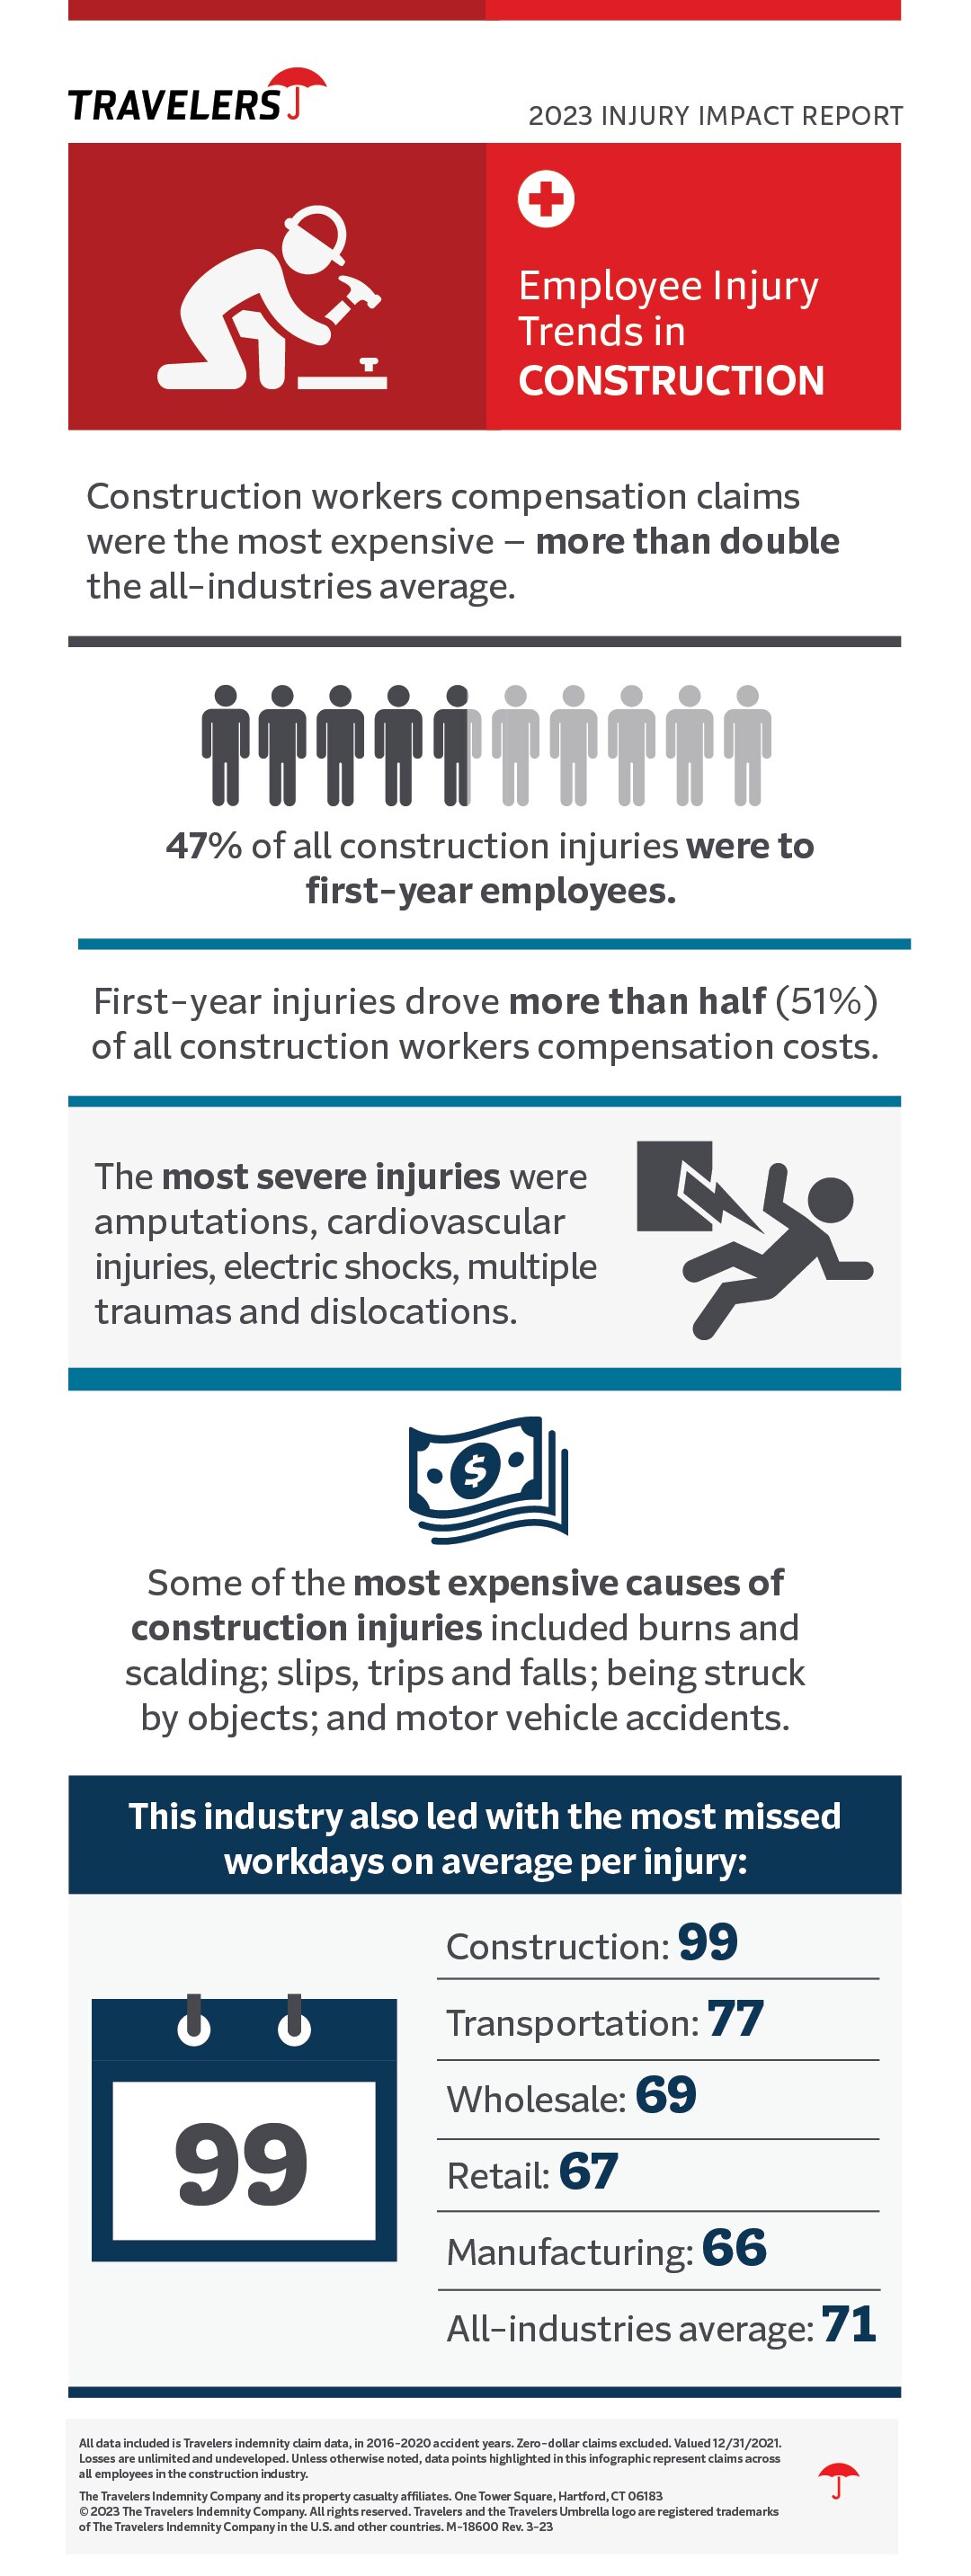 2023 Employee Injury Trends in Construction infographic, see details below